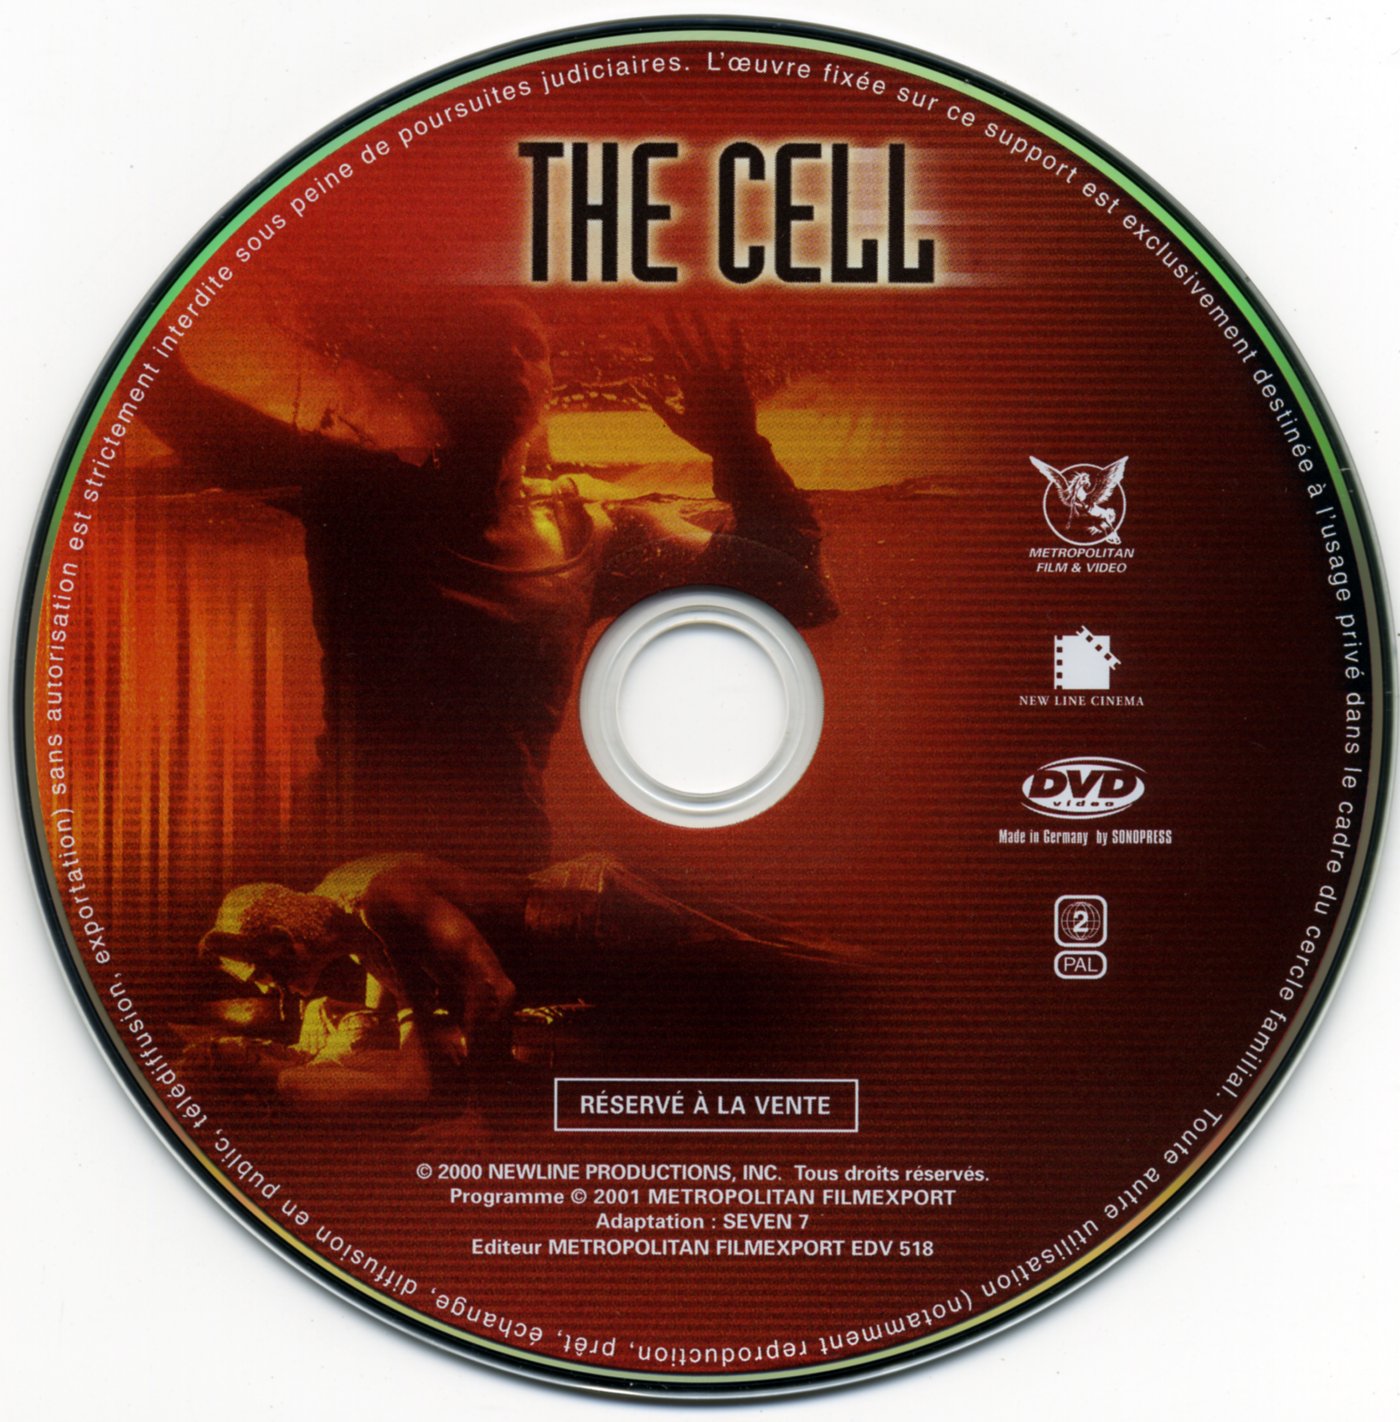 The cell